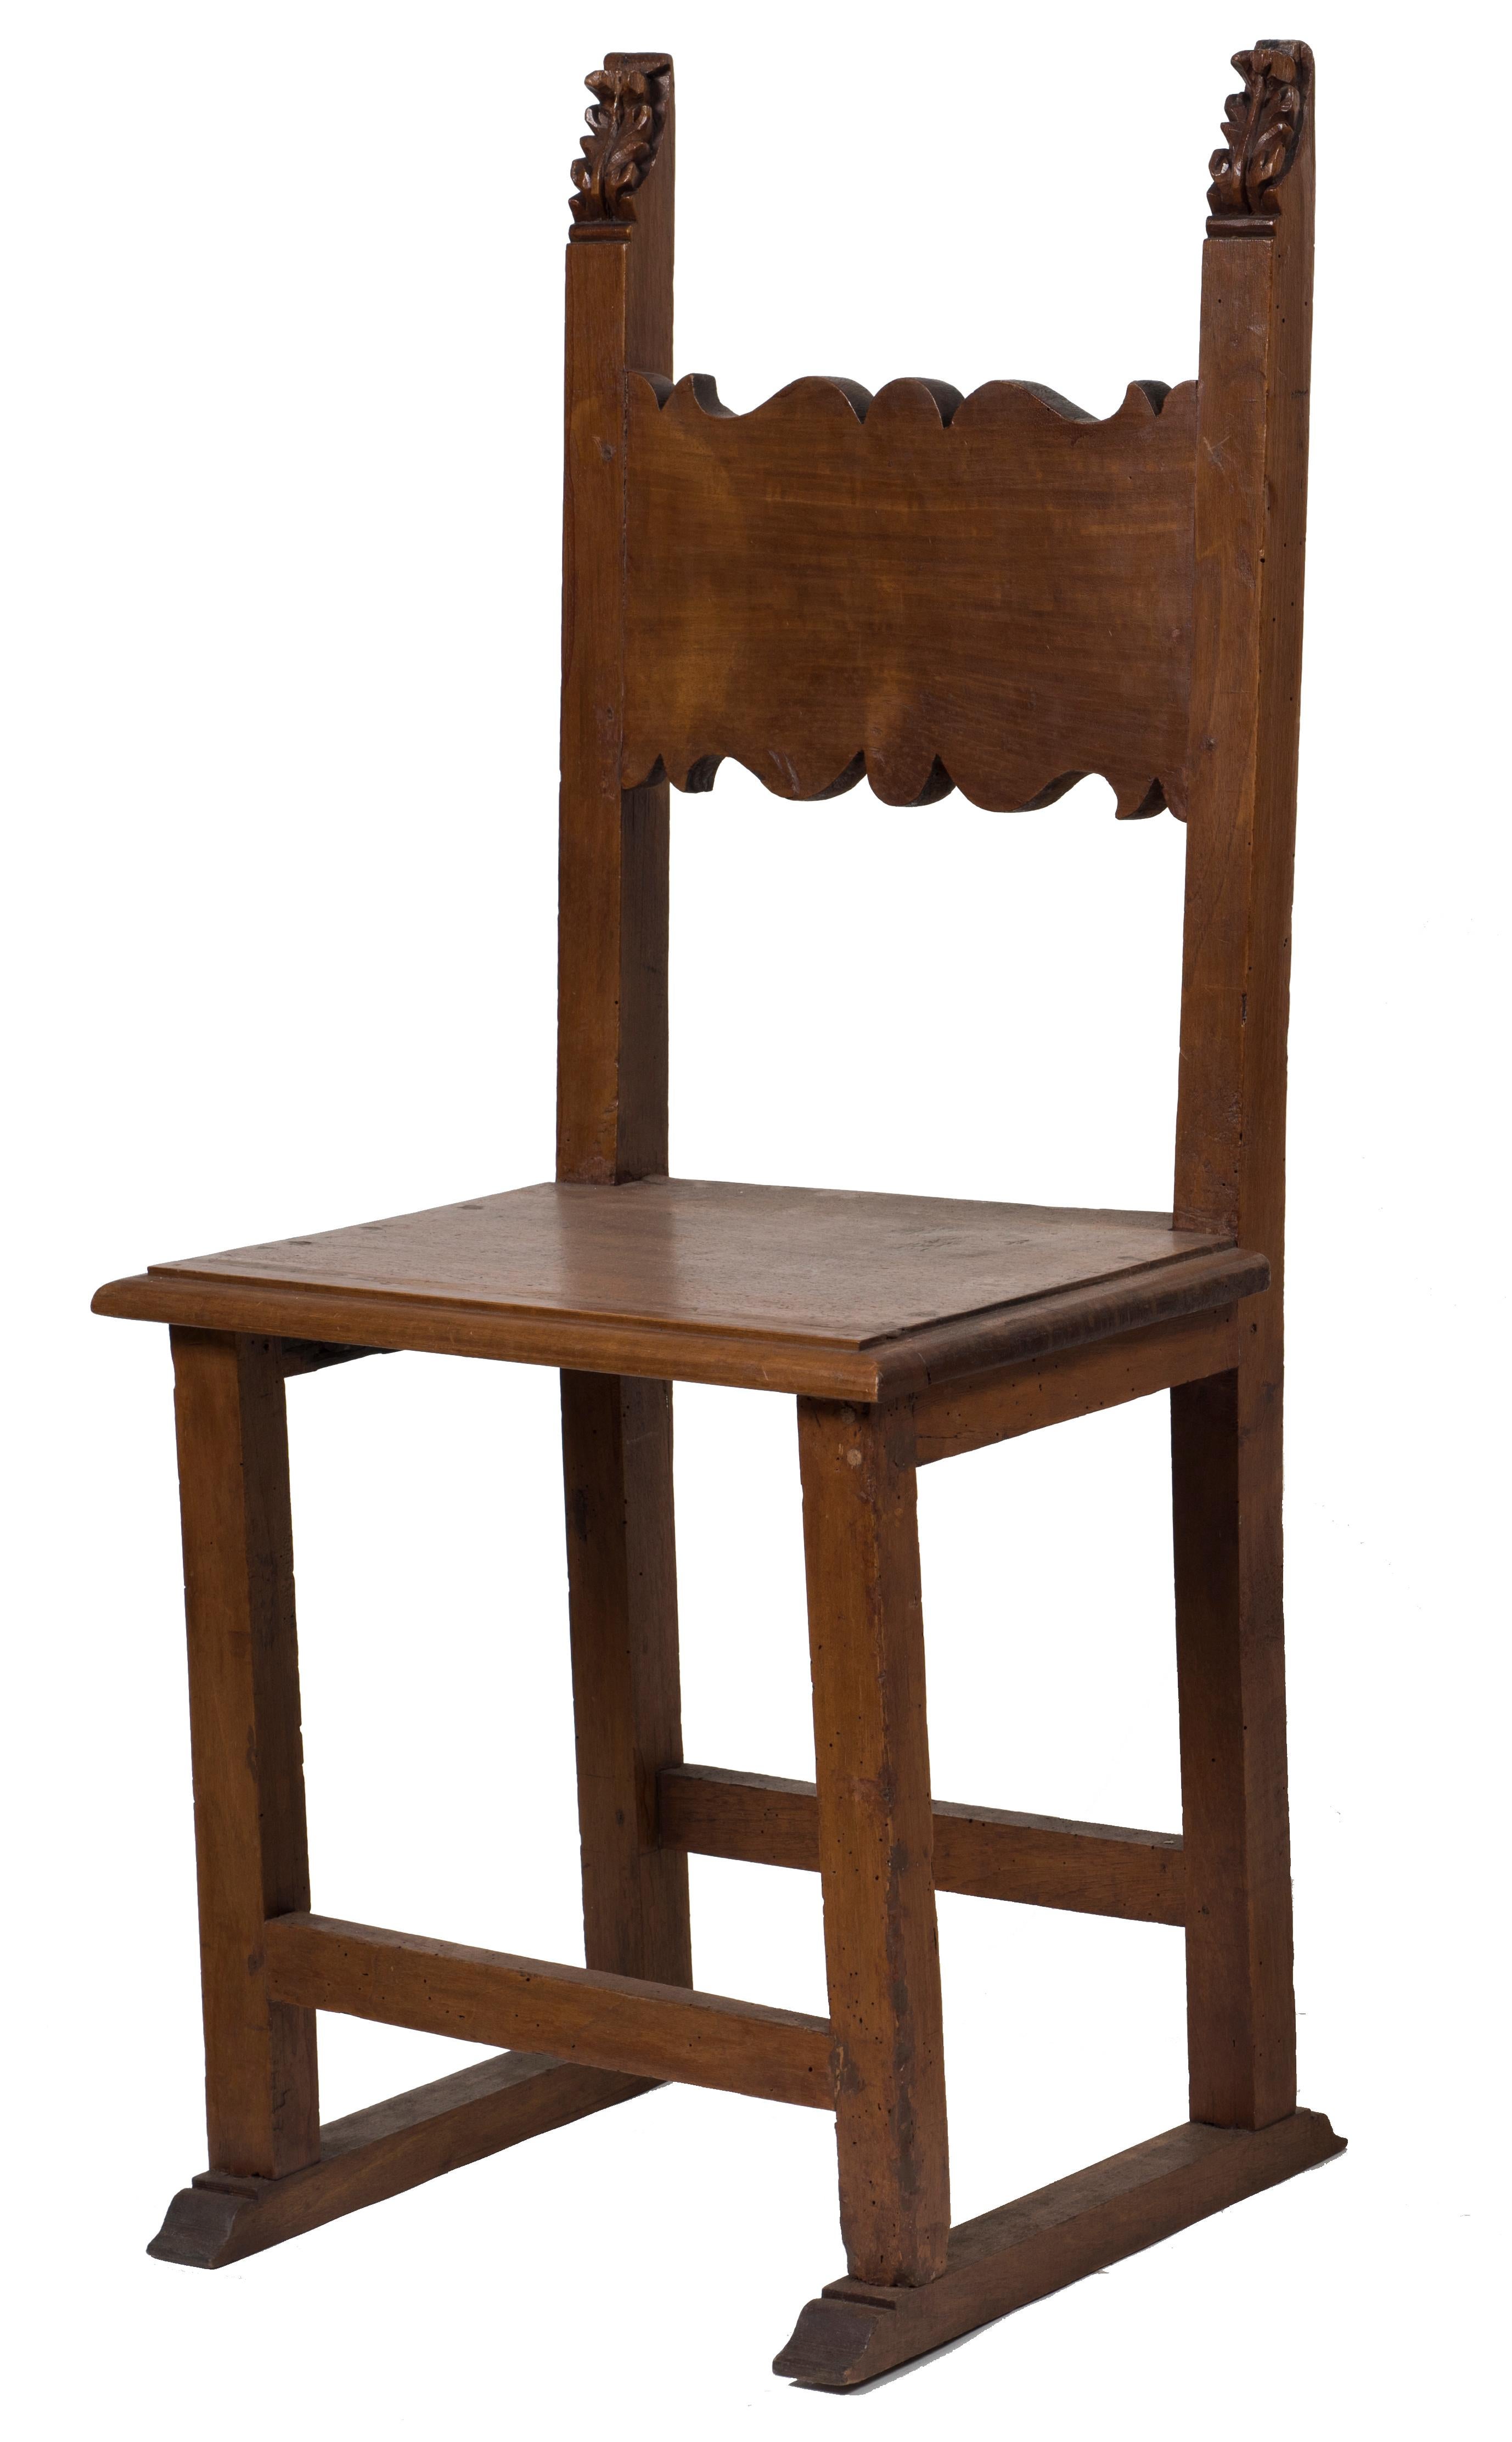 Wood Pair of Chairs and a Stool, Italy, 19th Century